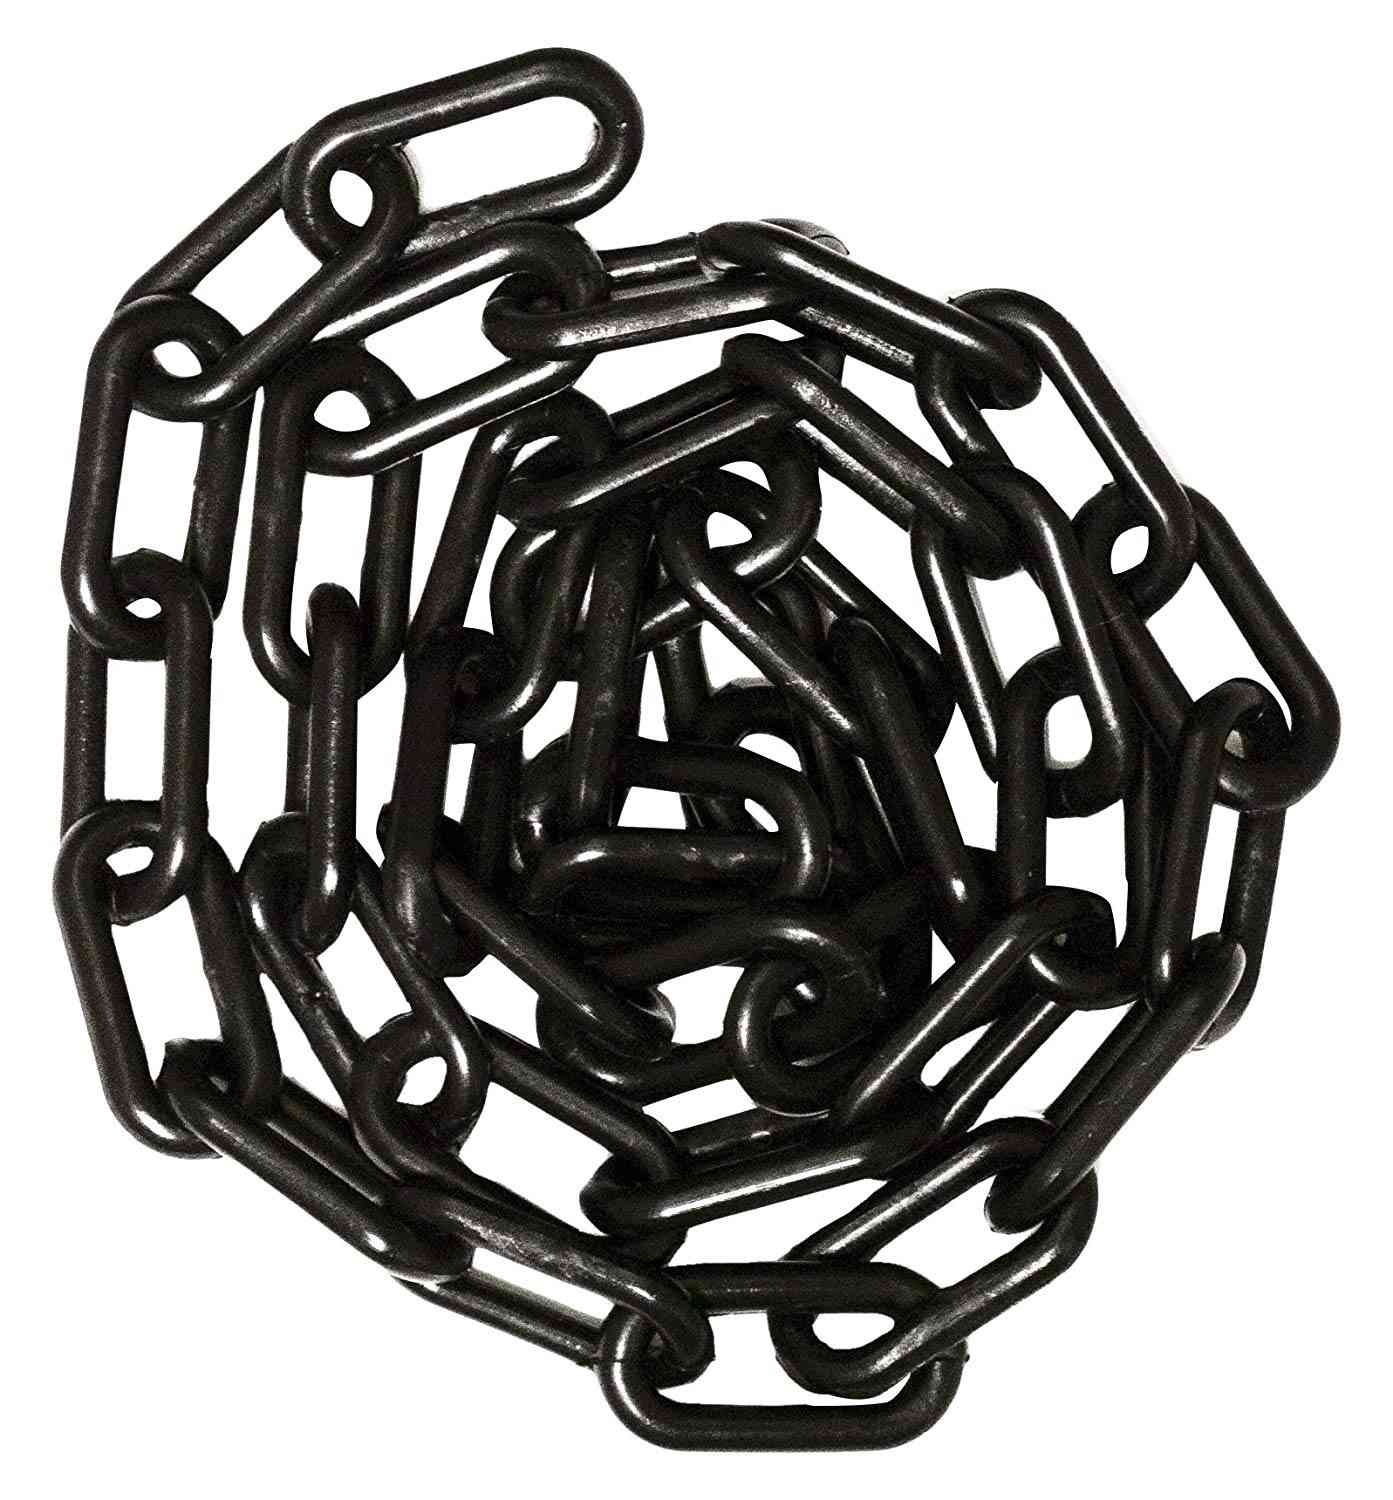 Uv Resistant, Plastic Chain Links For Crowd Control, Halloween, Prop